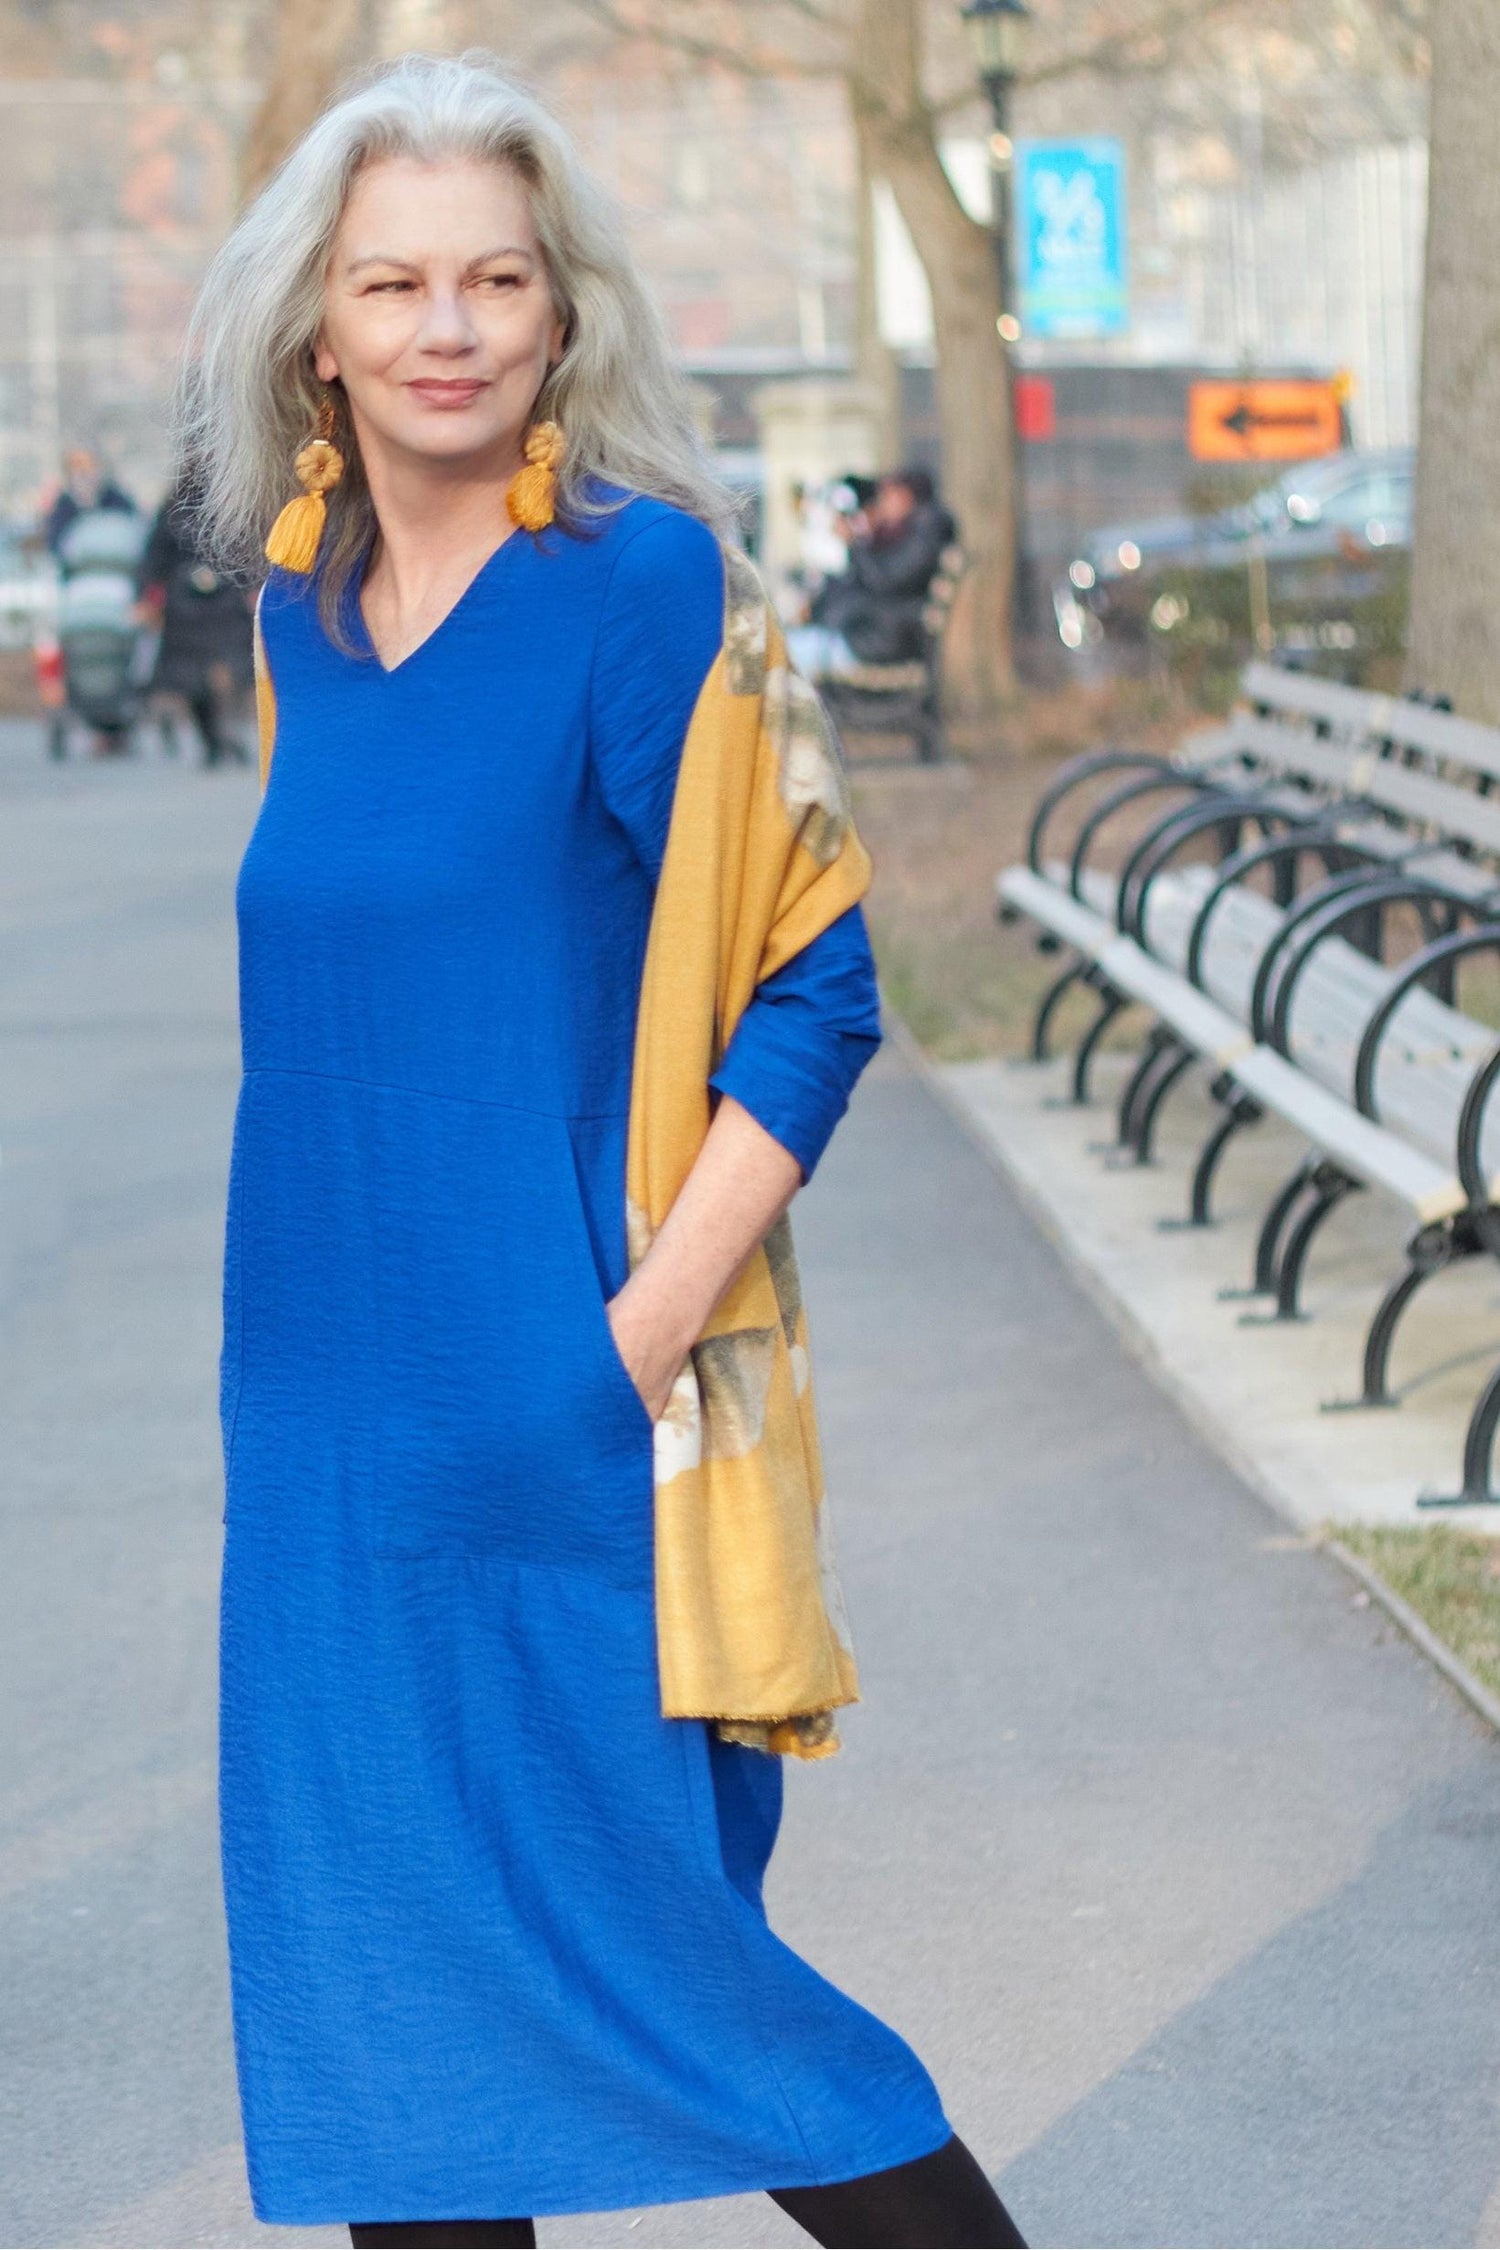 Woman with longer grey hair wearing a bright blue dress with v neckline, and yellow earrings and scarf.